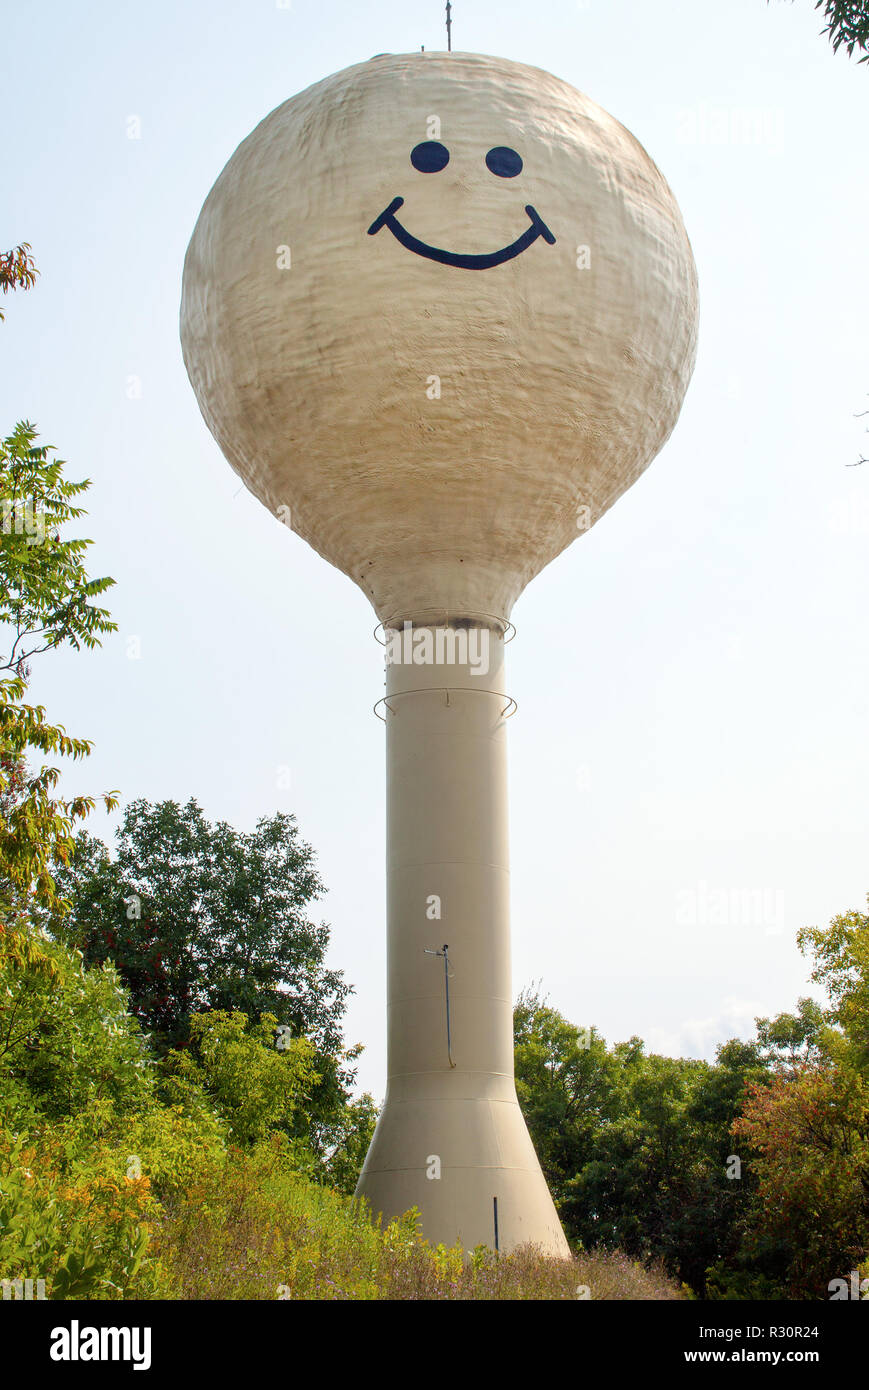 Smiley Face Water Tower in Ironwood, Michigan Stock Photo